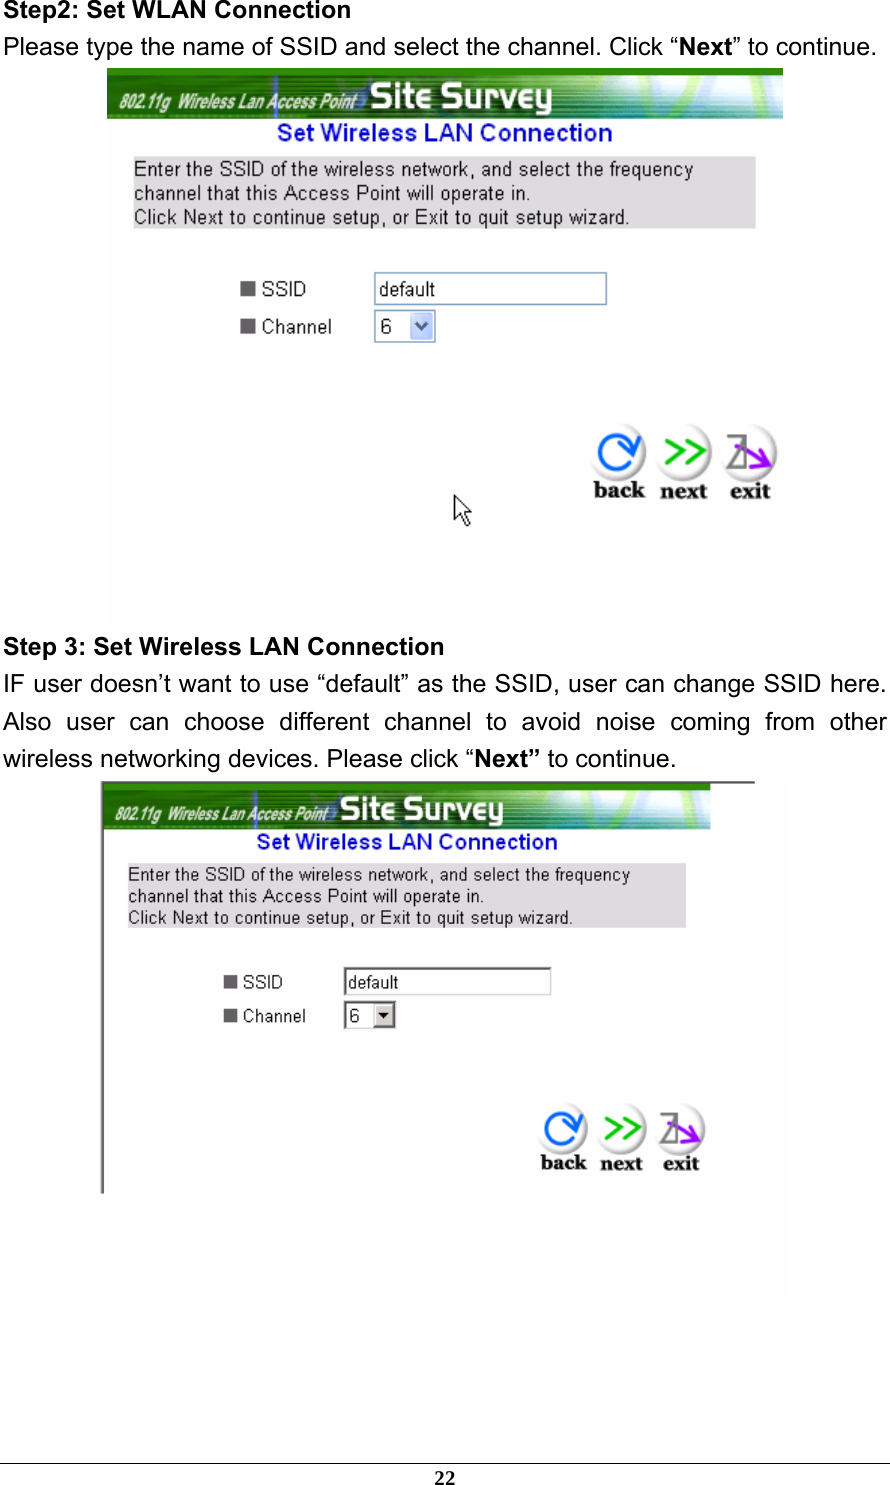 Step2: Set WLAN Connection Please type the name of SSID and select the channel. Click “Next” to continue.  Step 3: Set Wireless LAN Connection IF user doesn’t want to use “default” as the SSID, user can change SSID here. Also user can choose different channel to avoid noise coming from other wireless networking devices. Please click “Next” to continue.     22 